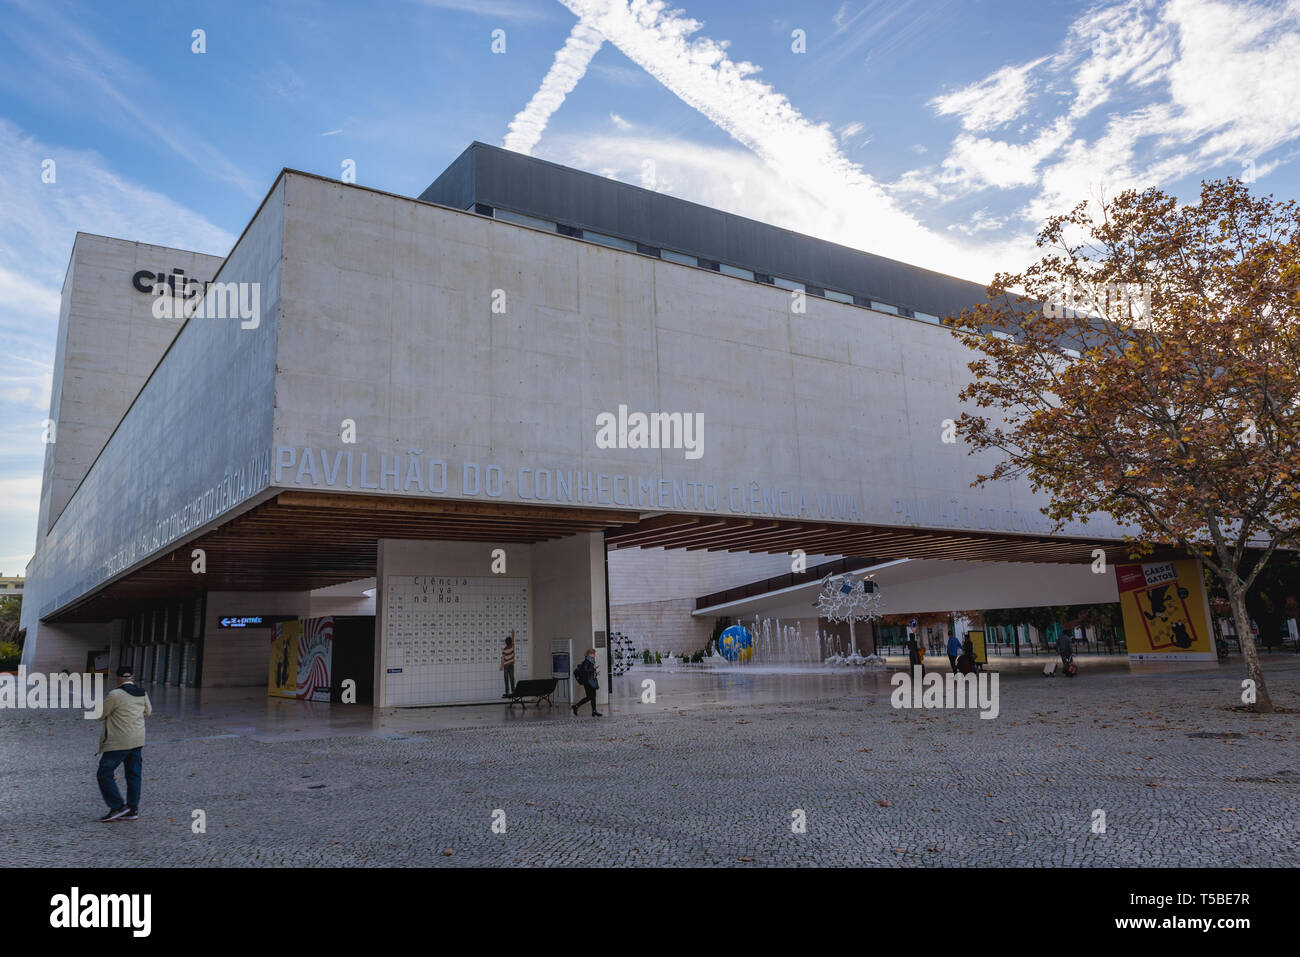 Pavilhao do Conhecimento - The Pavilion of Knowledge - science museum in  Lisbon, portugal Stock Photo - Alamy